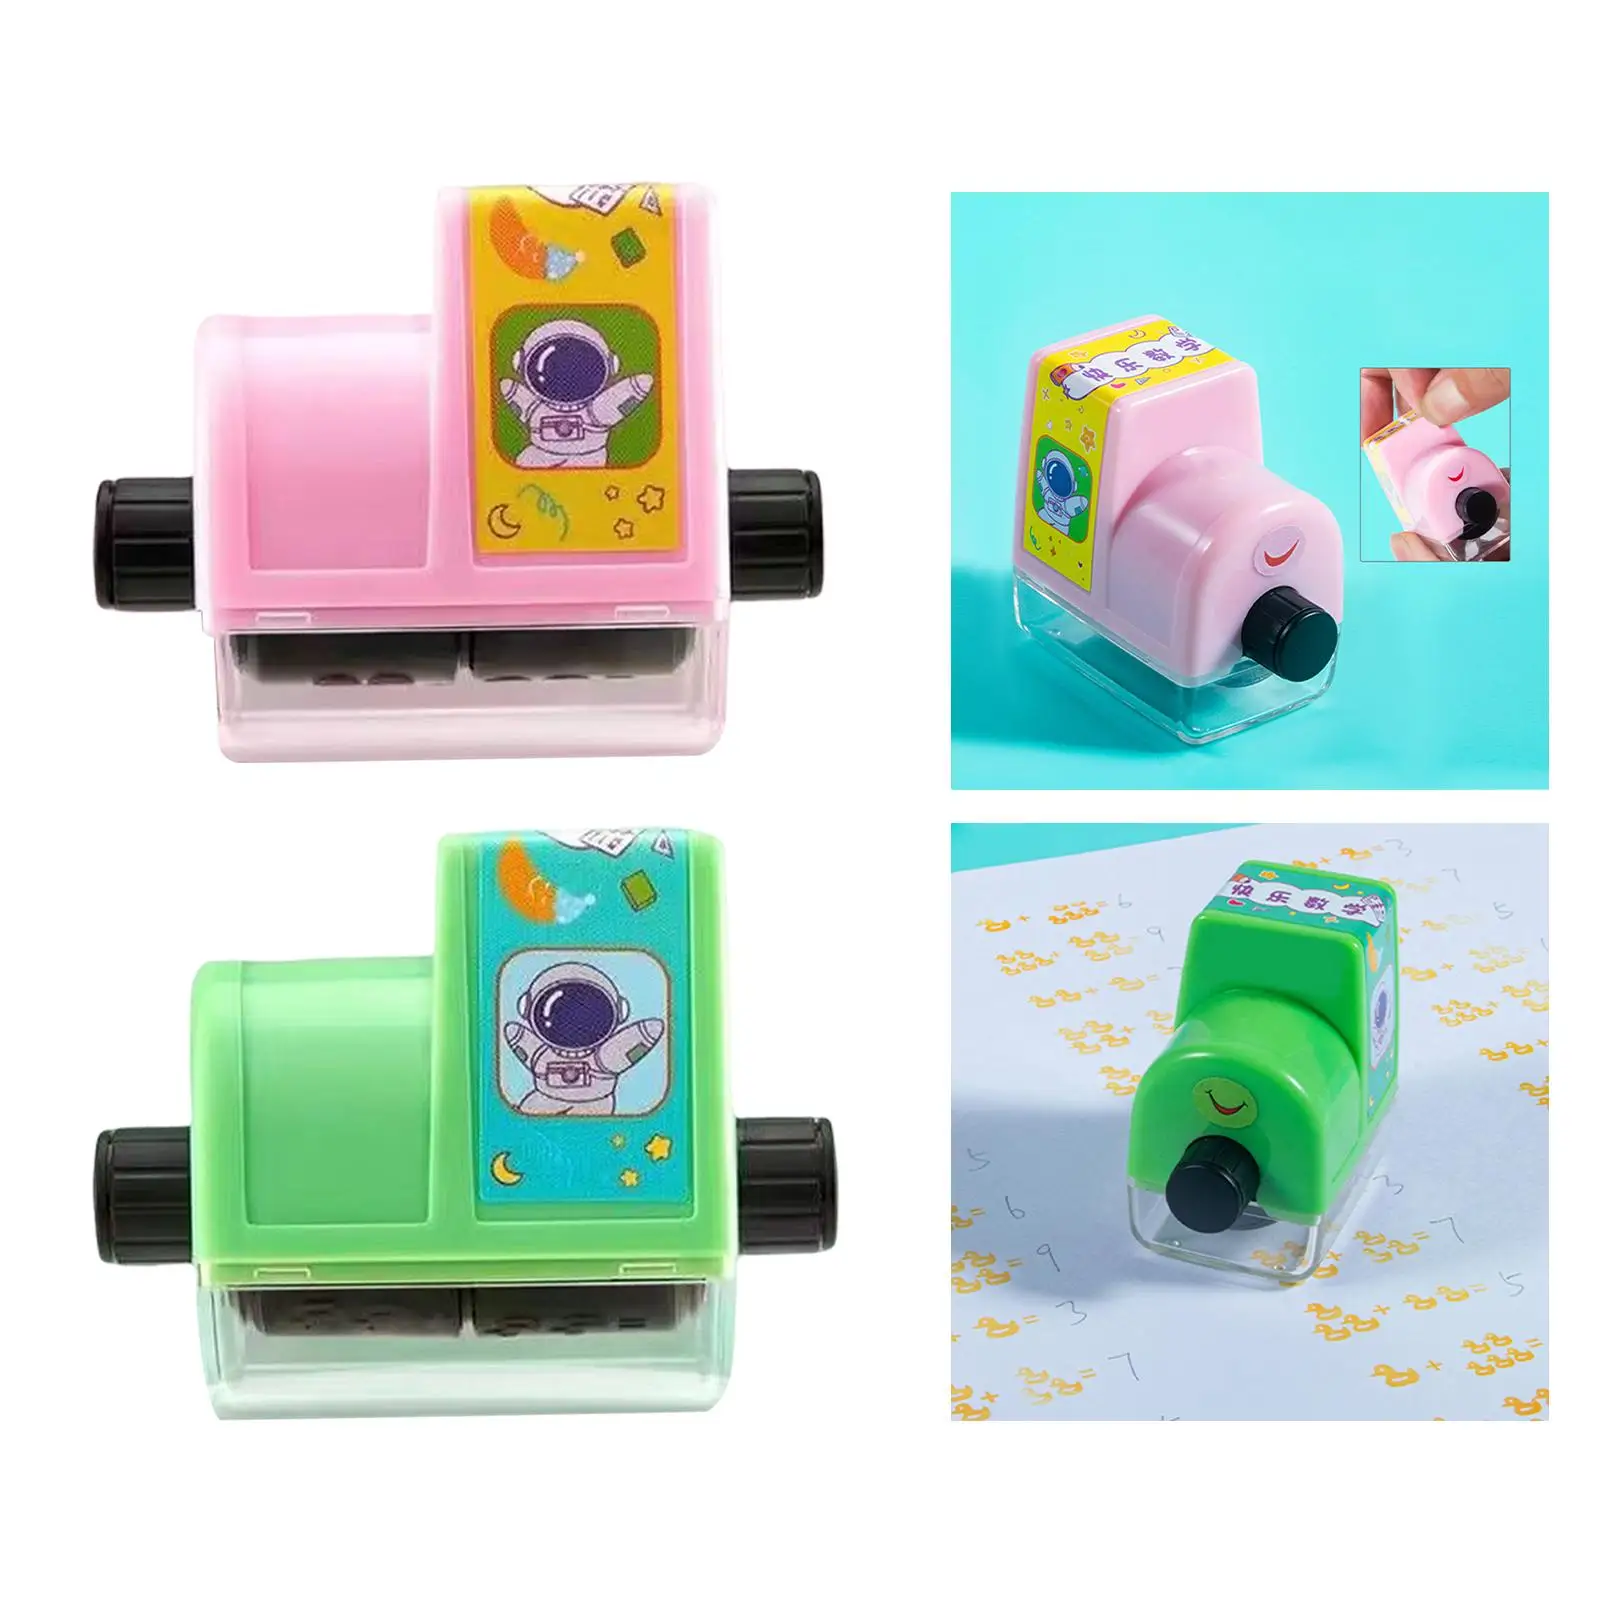 Reusable Math Stamp Early Math Educational Toy Math Calculation Practice Rolling Stamp for Kindergarten Kids Boy Birthday Gift